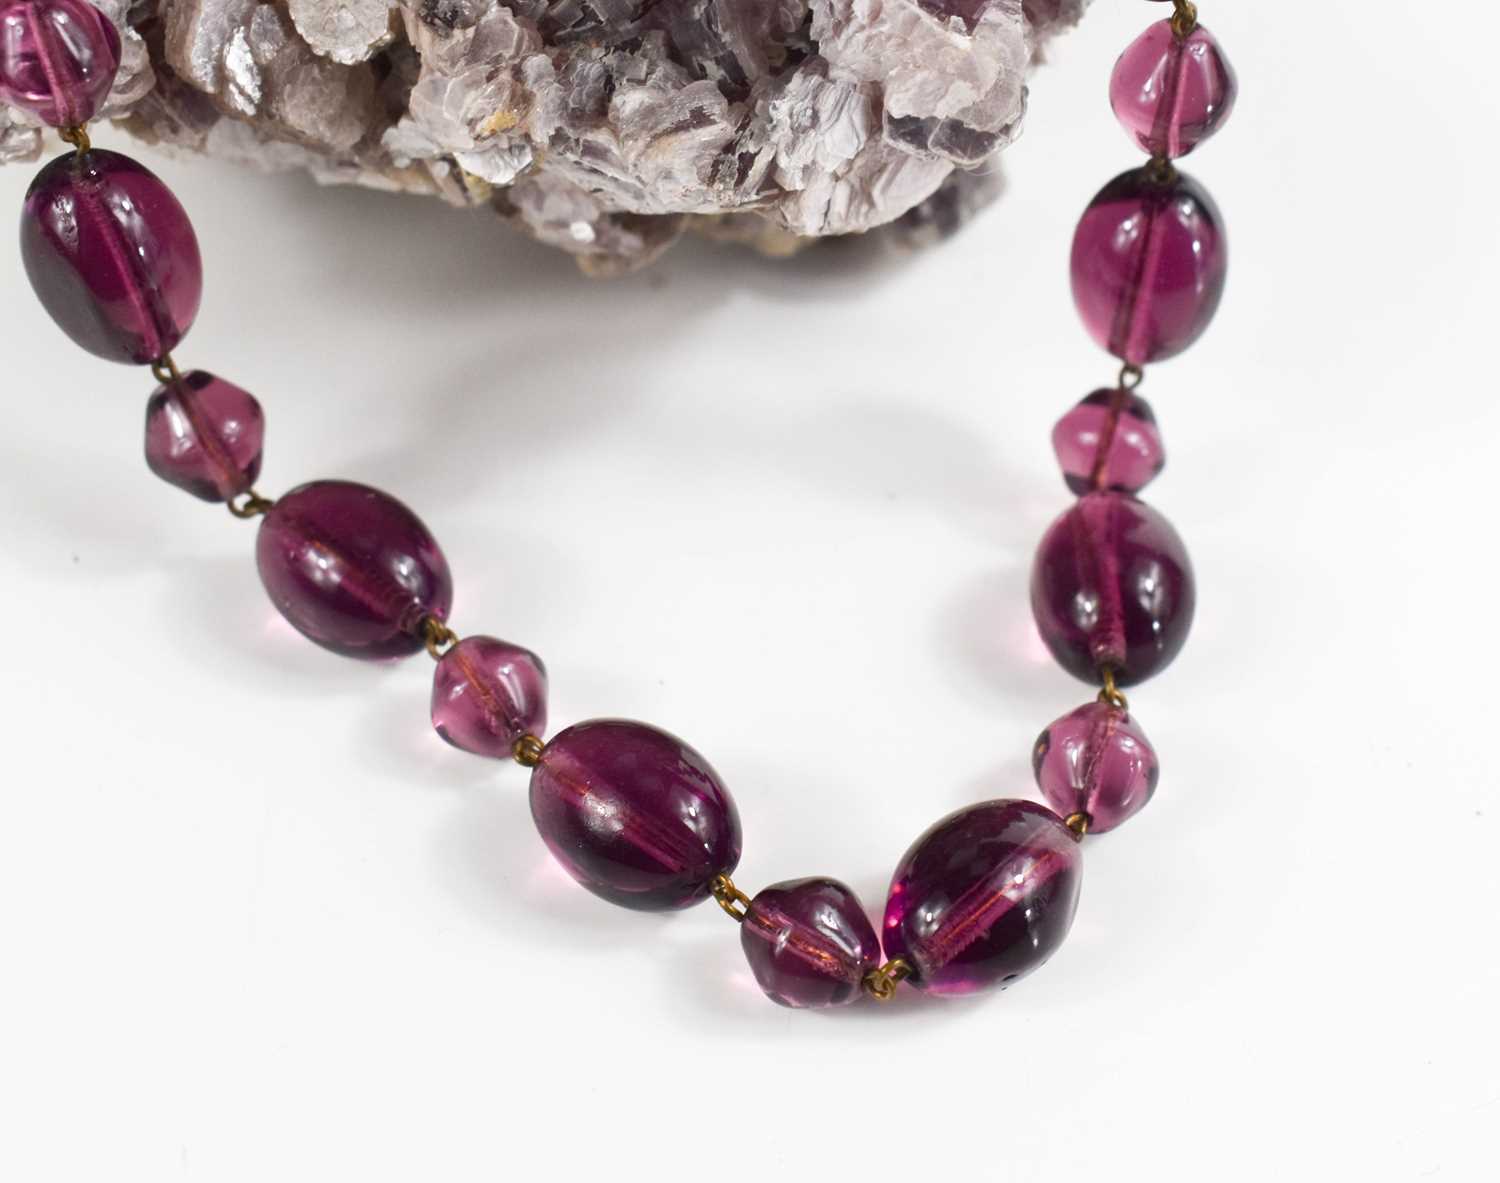 An antique amethyst beaded necklace, 49g, 40cm long. - Image 3 of 3